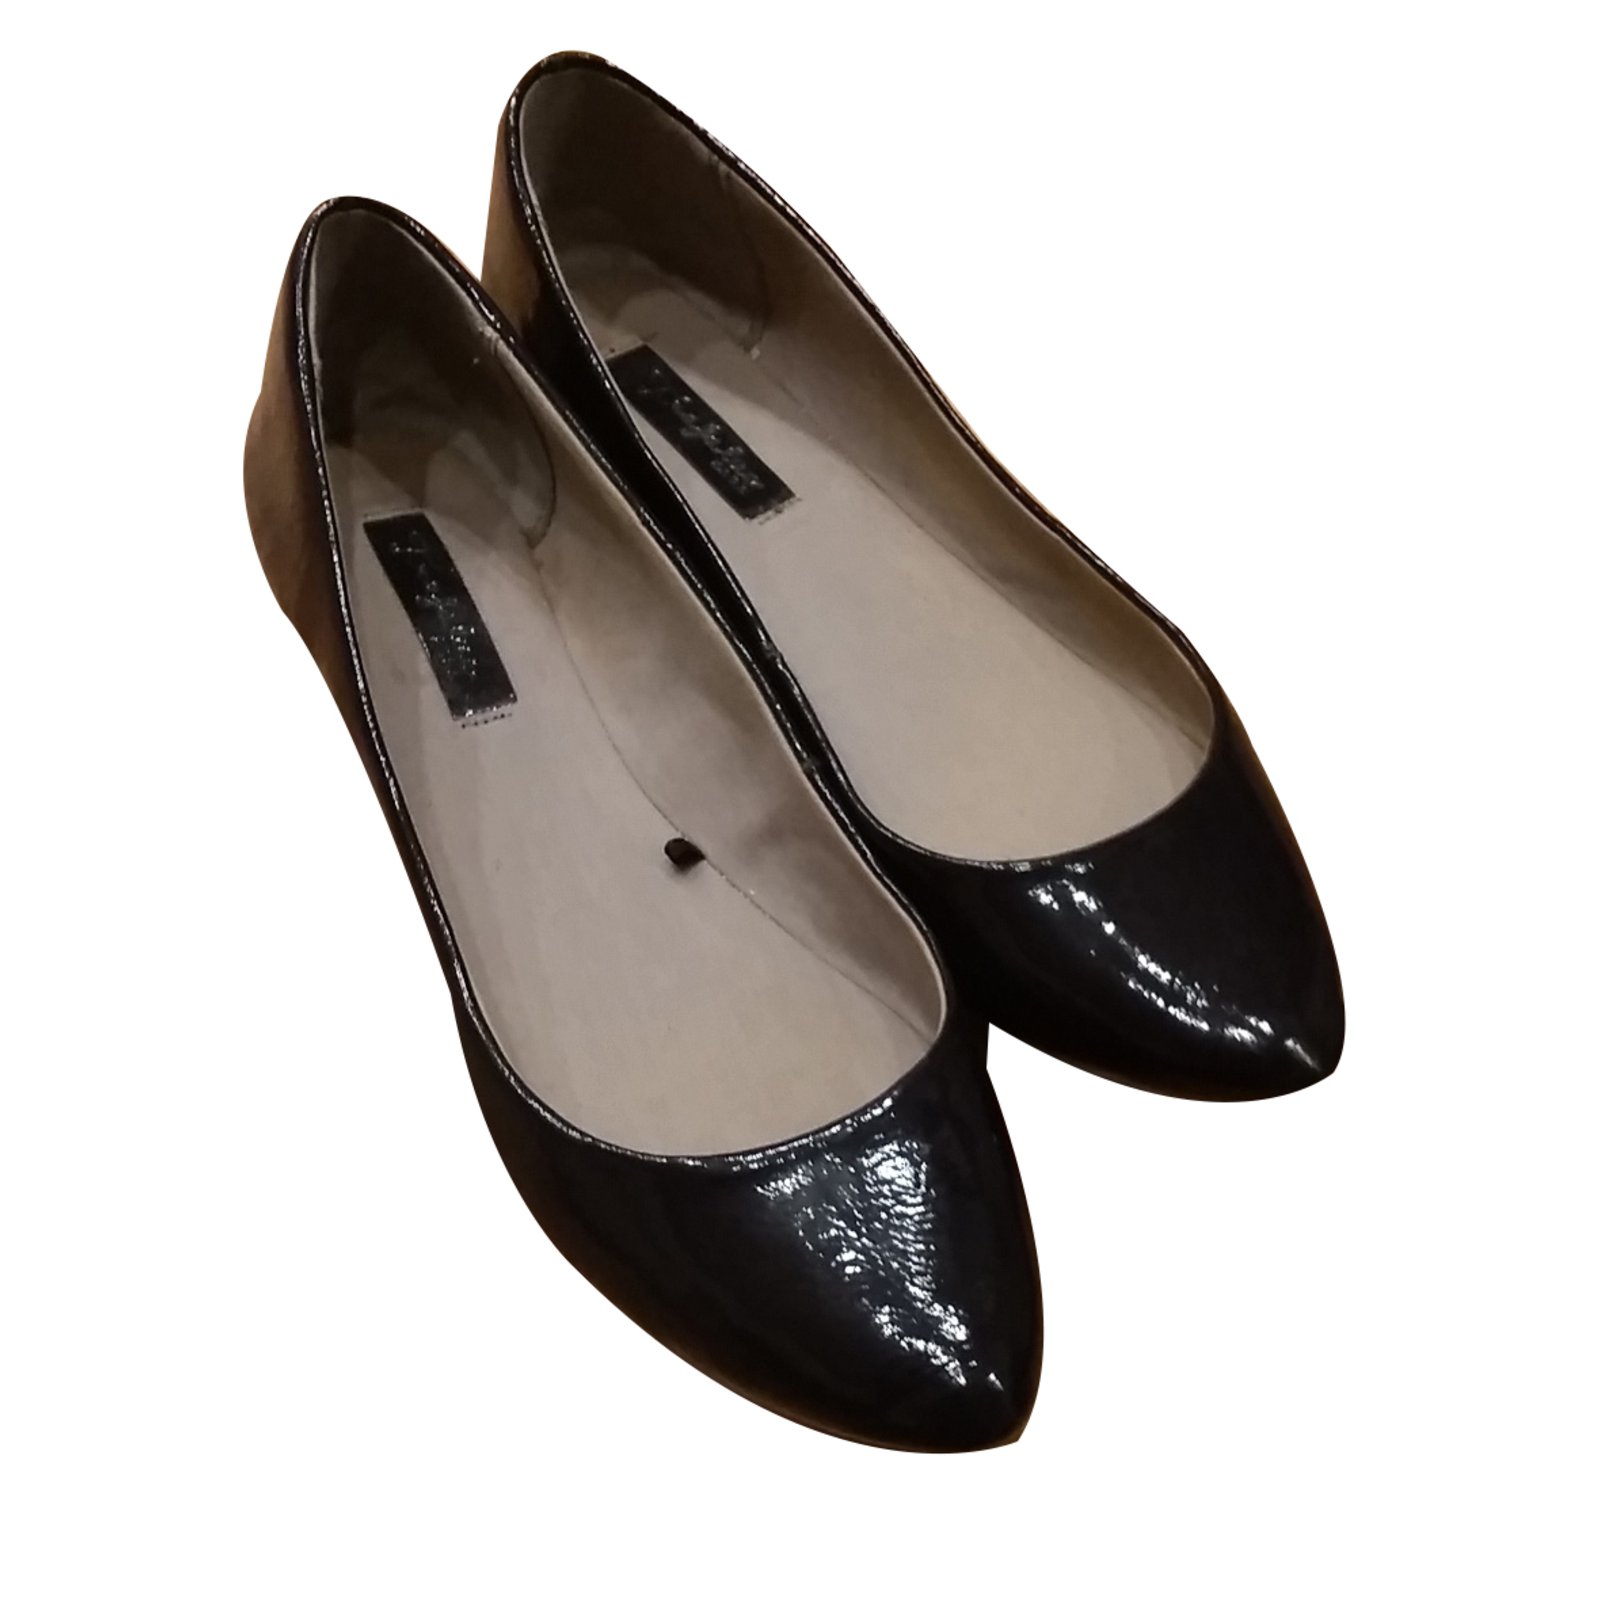 zara patent leather shoes